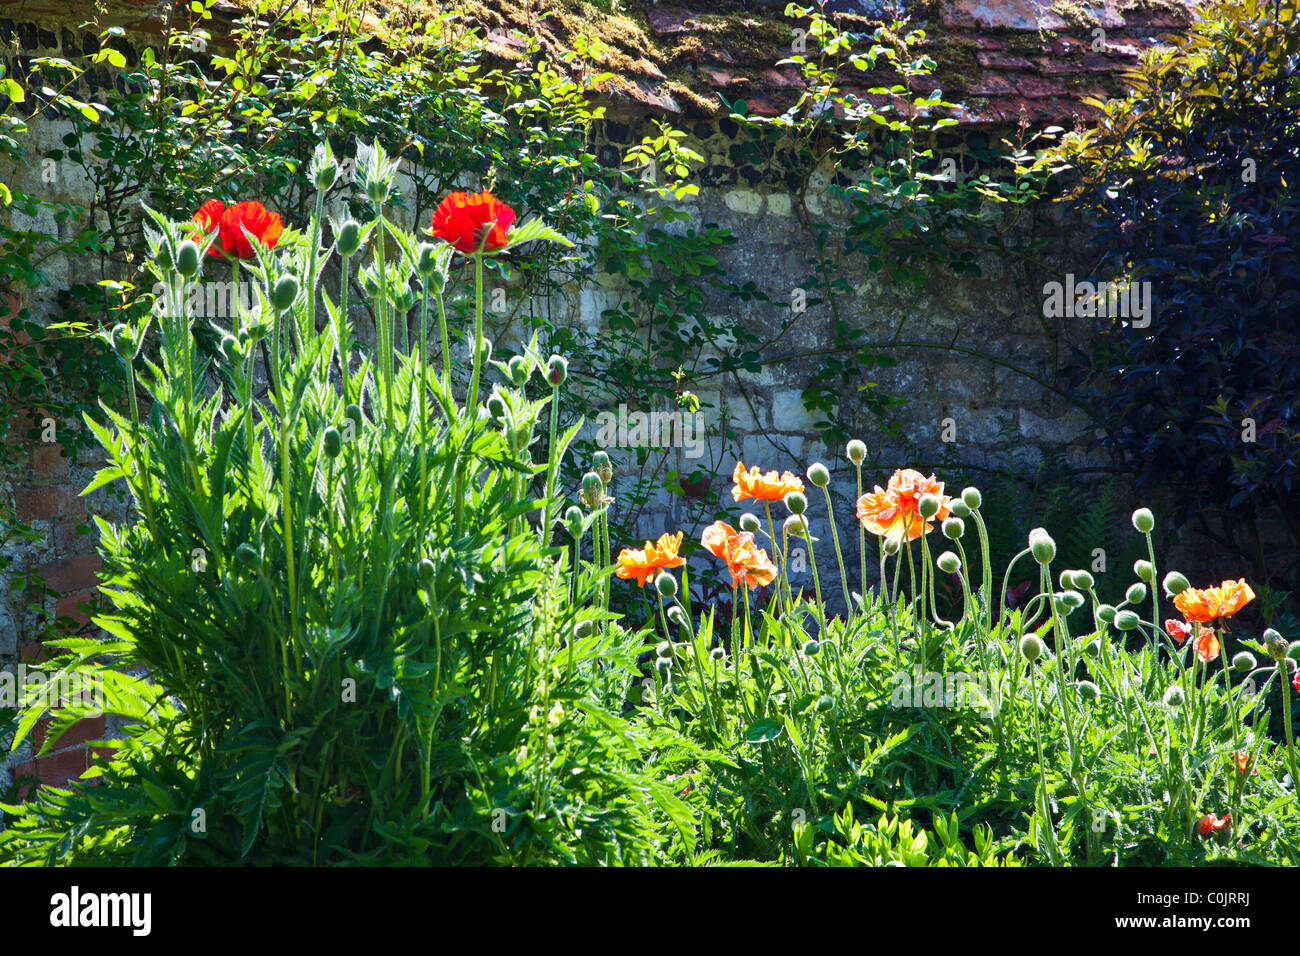 A backlit flower border with poppies against a wall in an English country garden in summer Stock Photo